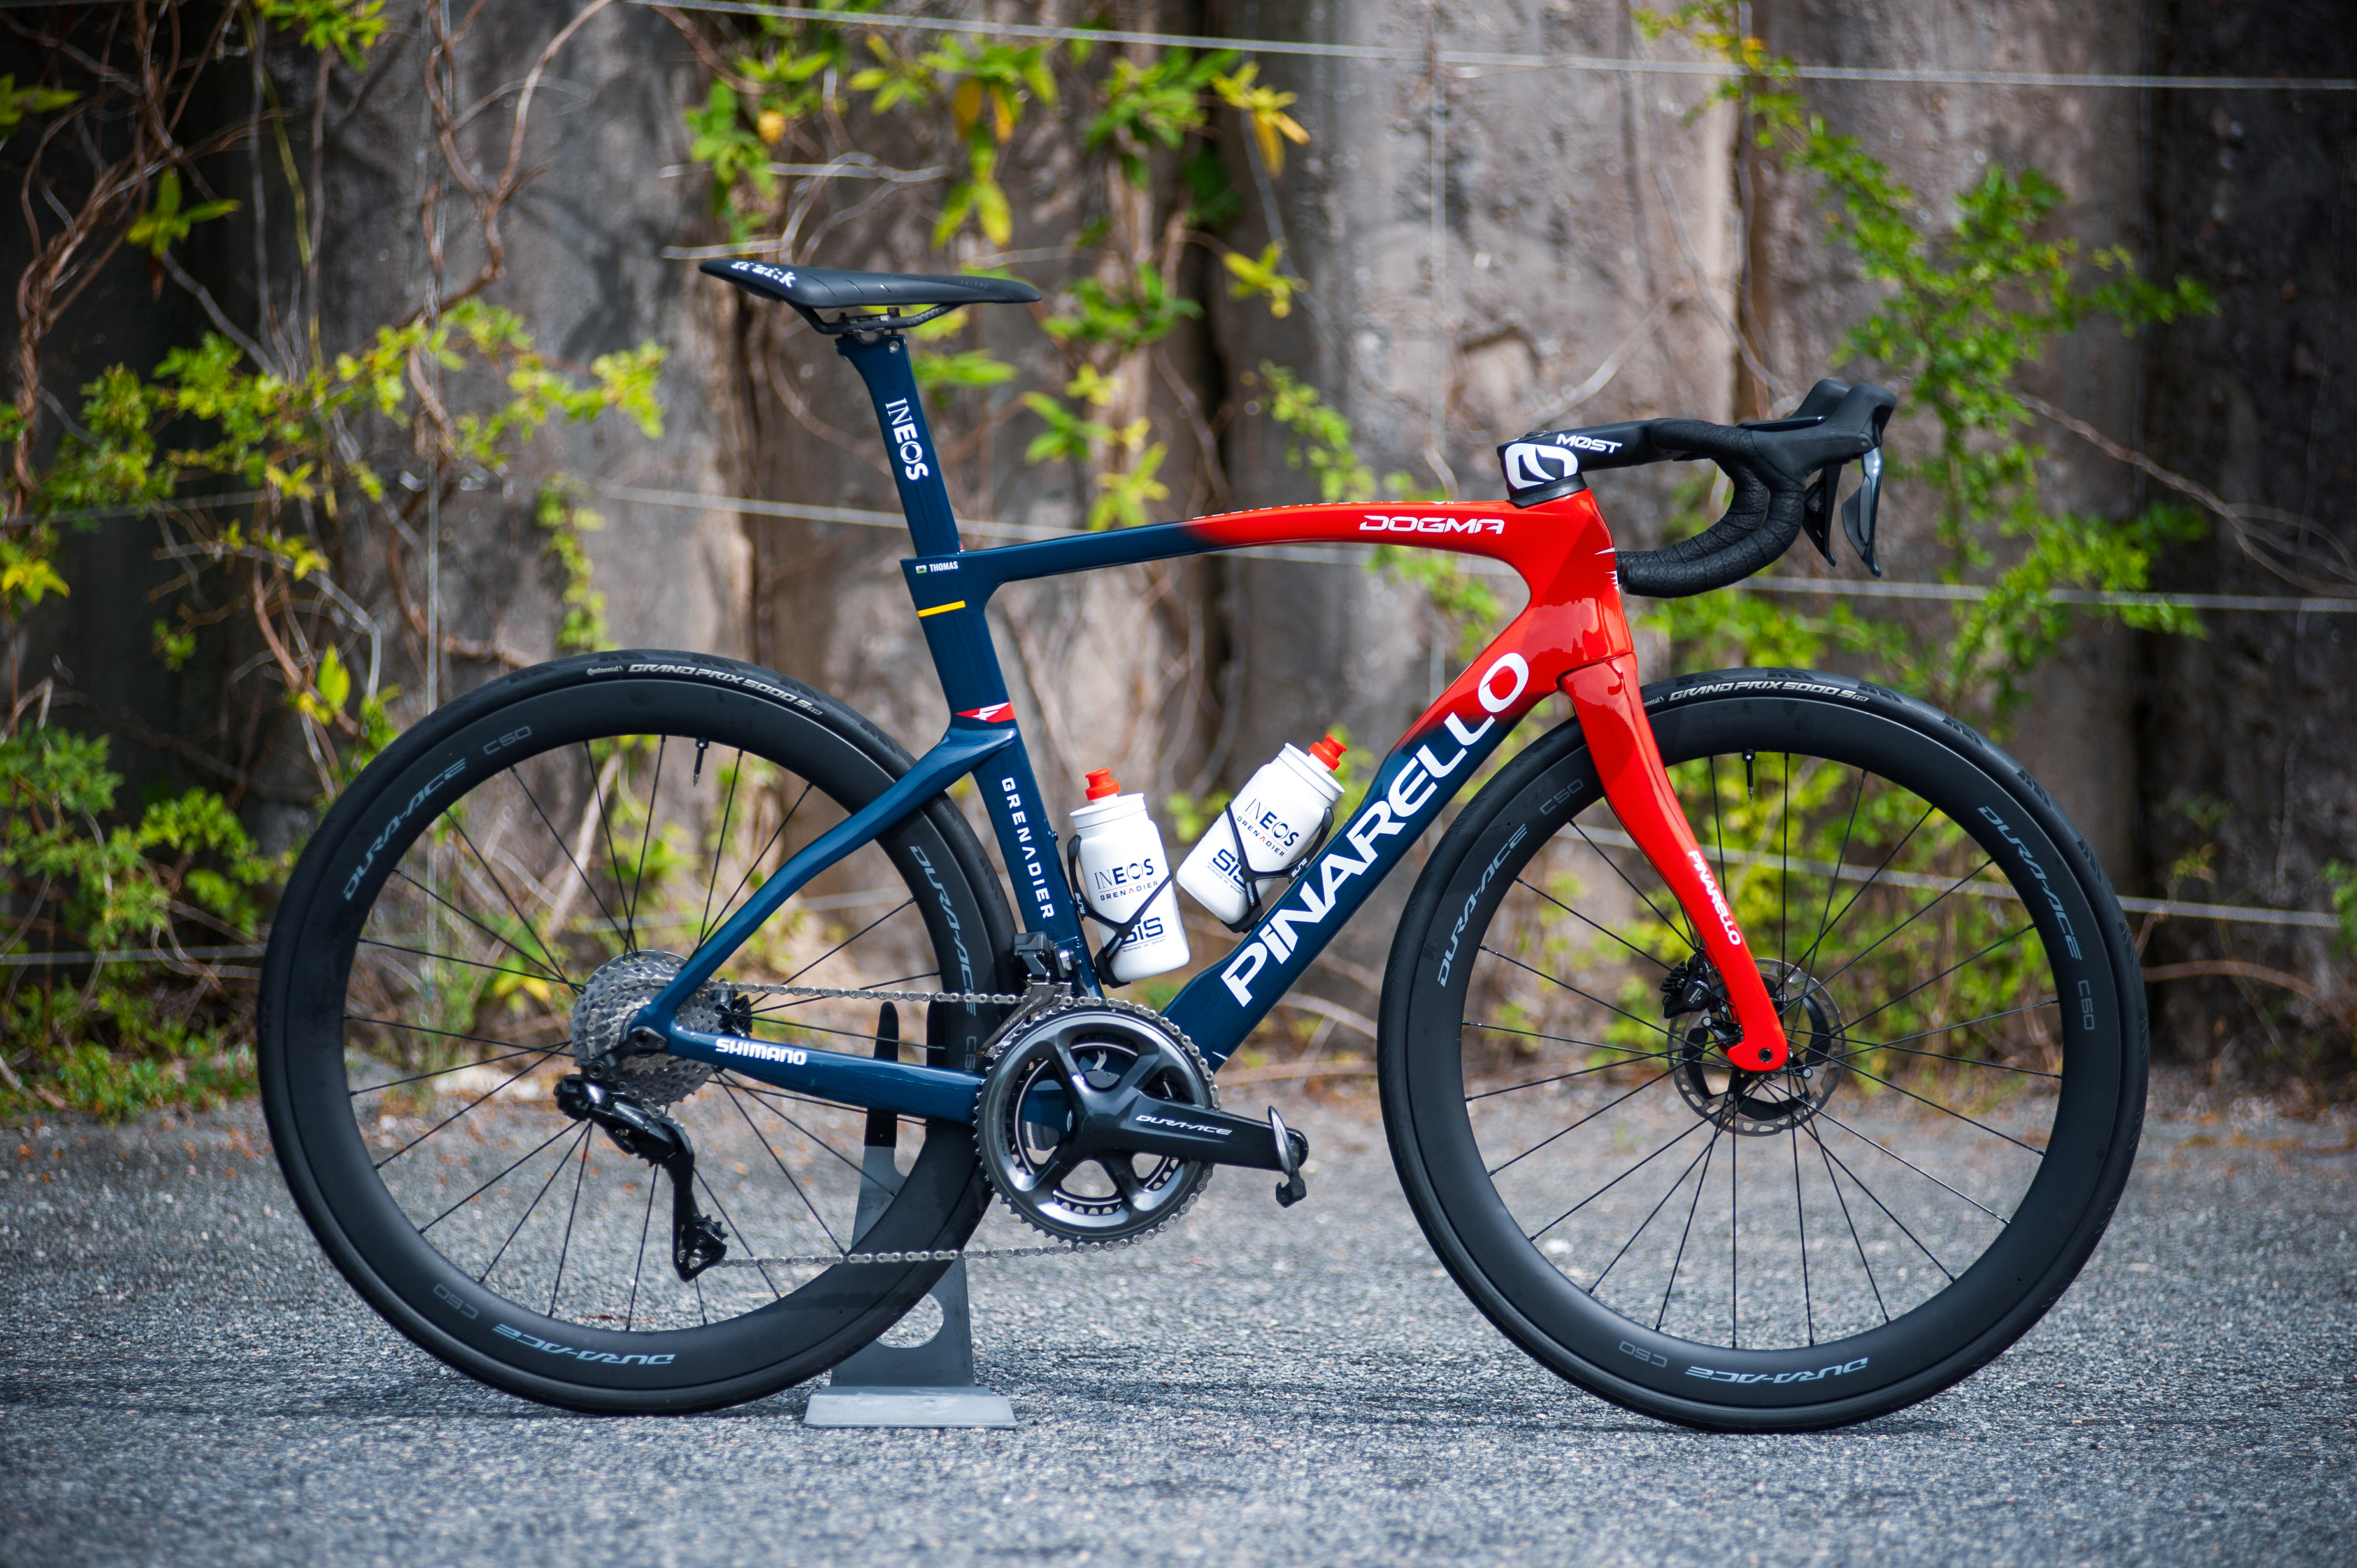 A detailed look at Geraint Thomas' Pinarello Dogma F at the Tour de France